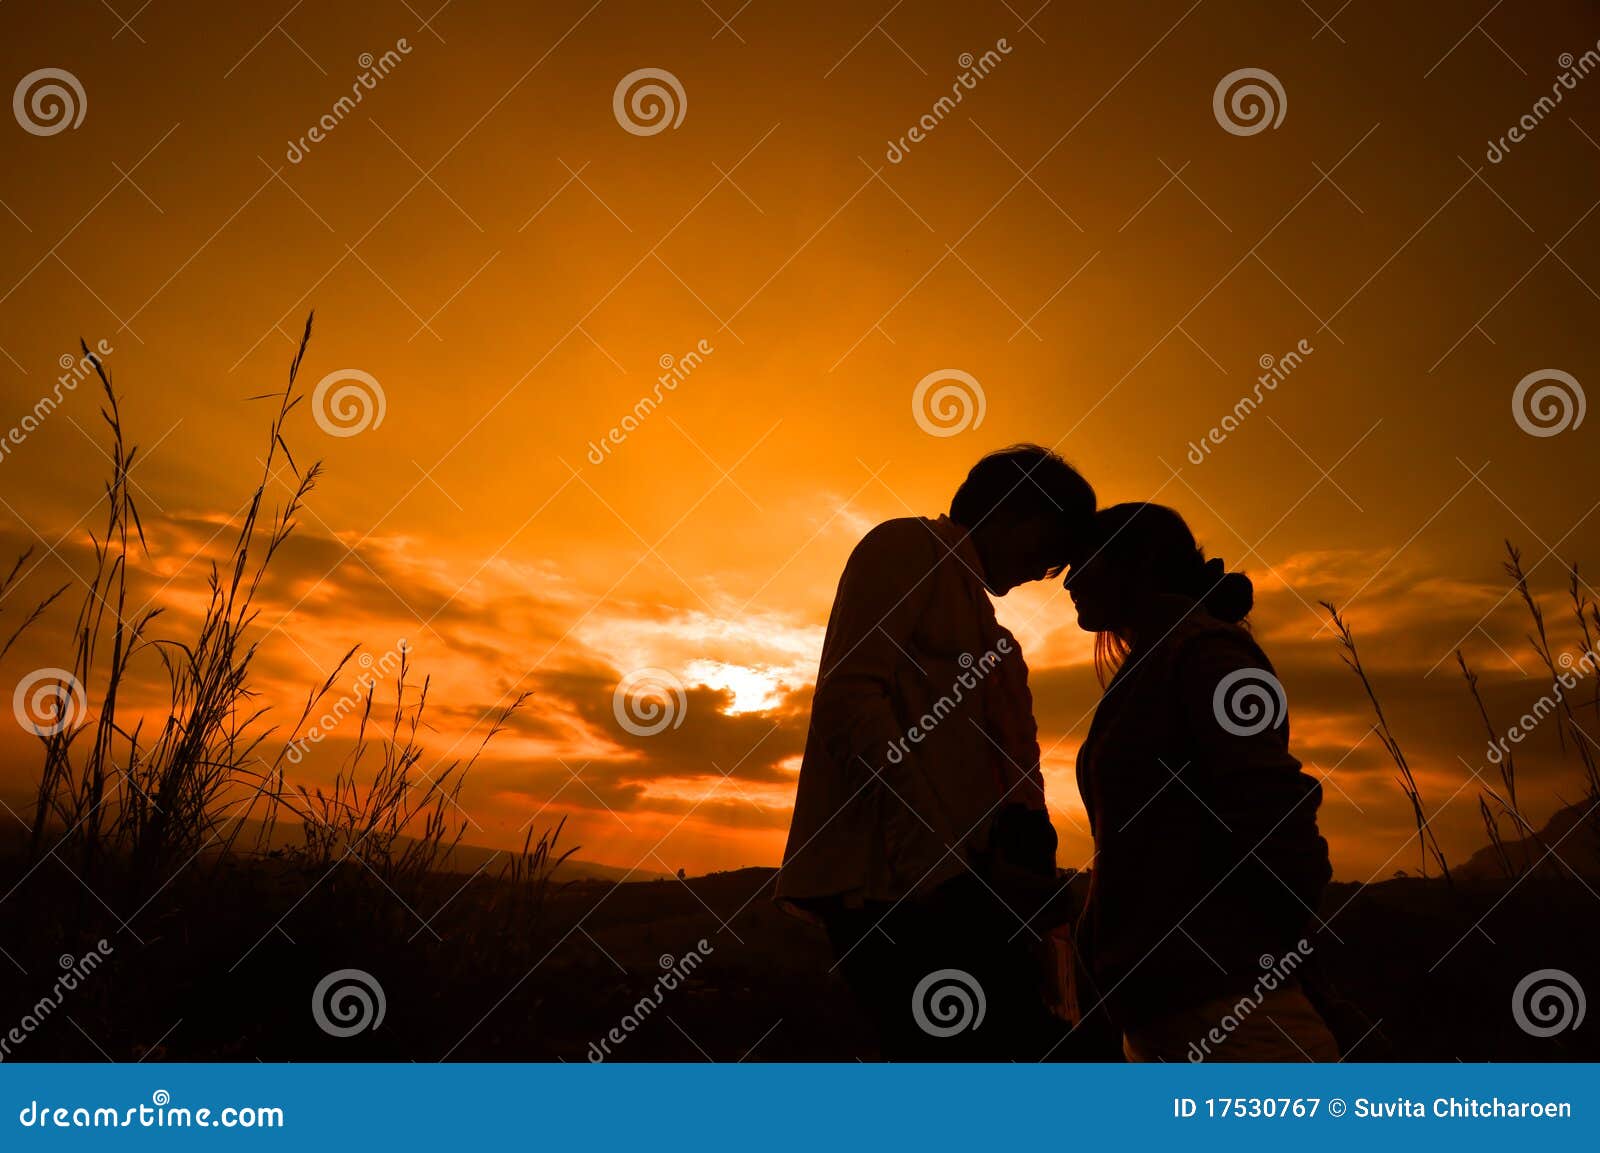 lover couple in sunset background